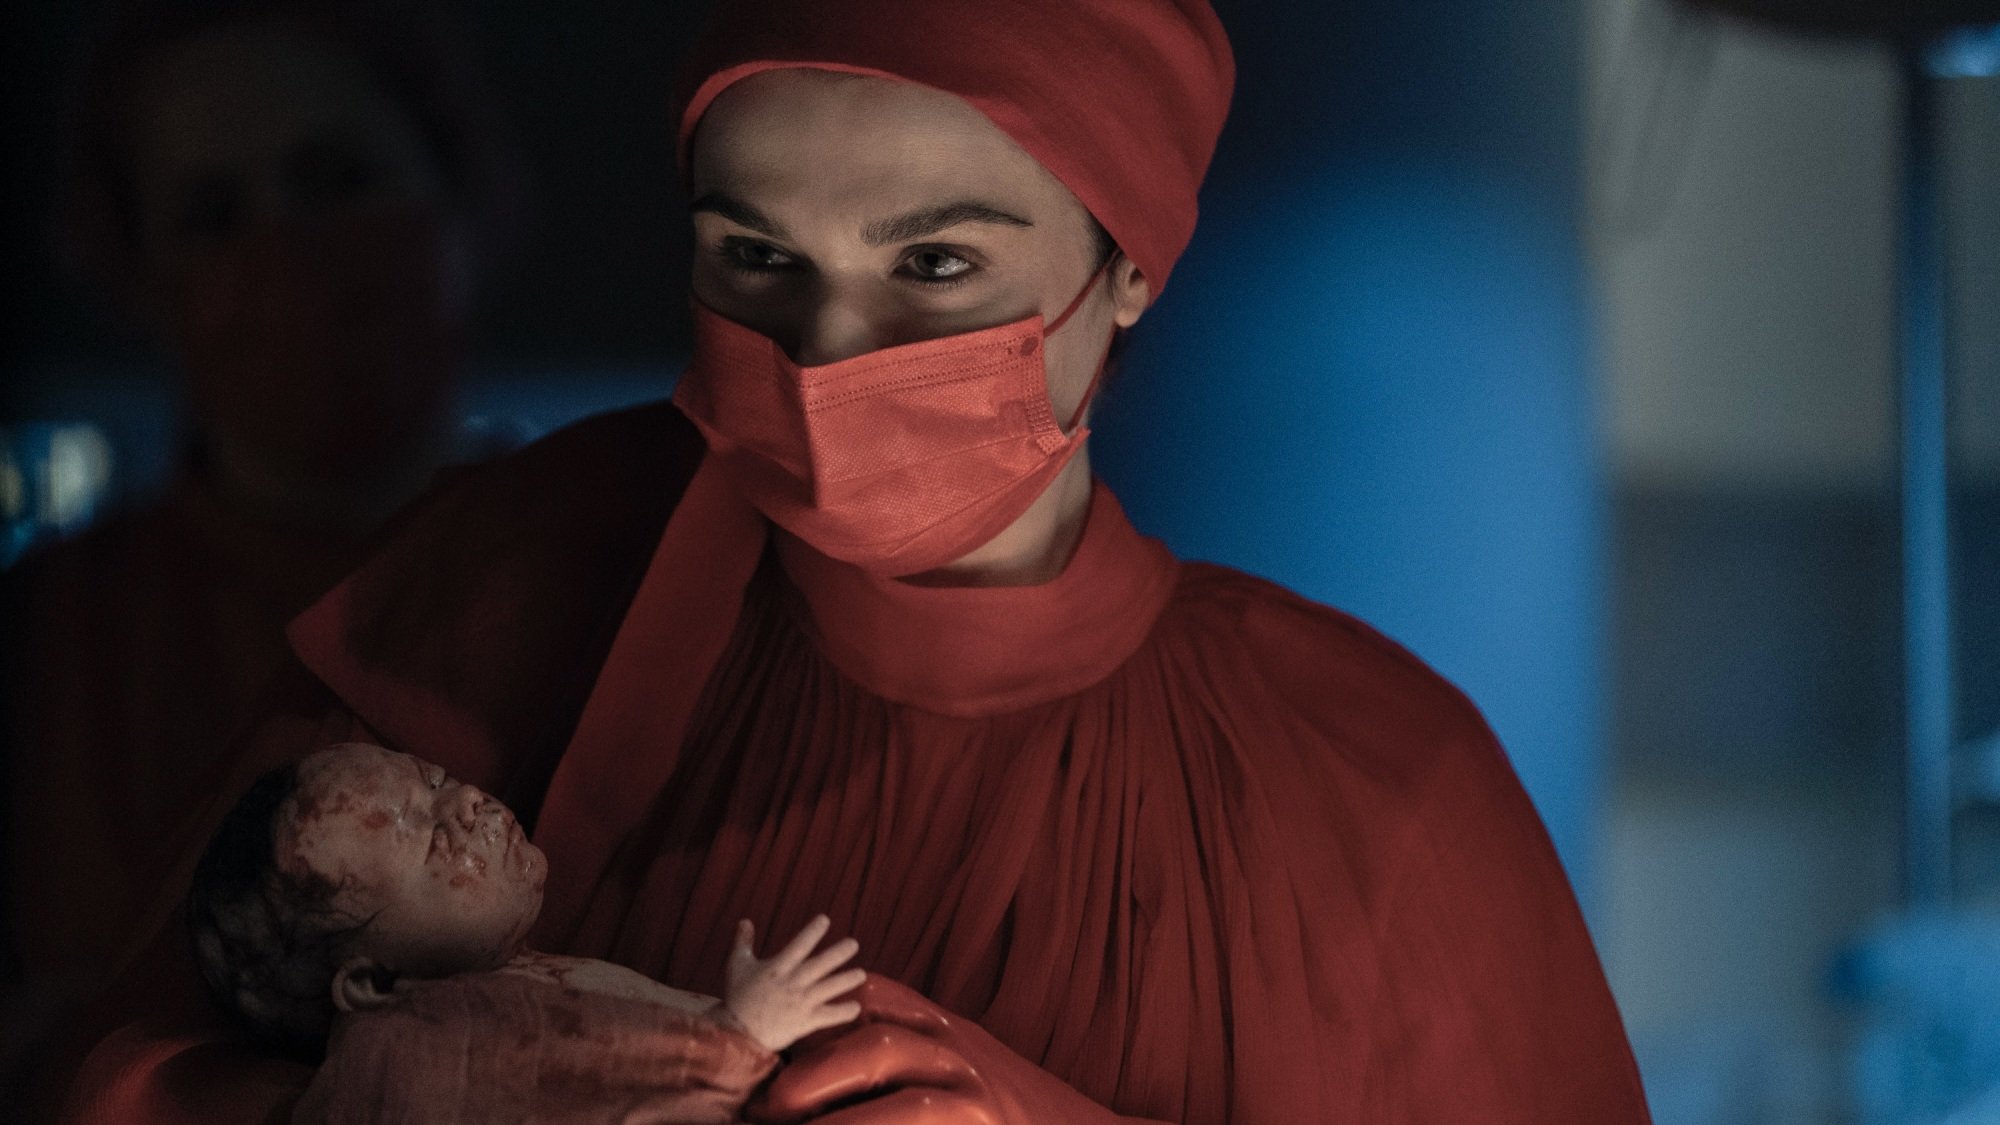 A woman in red scrubs and a red hospital mask cradles a bloody newborn baby.